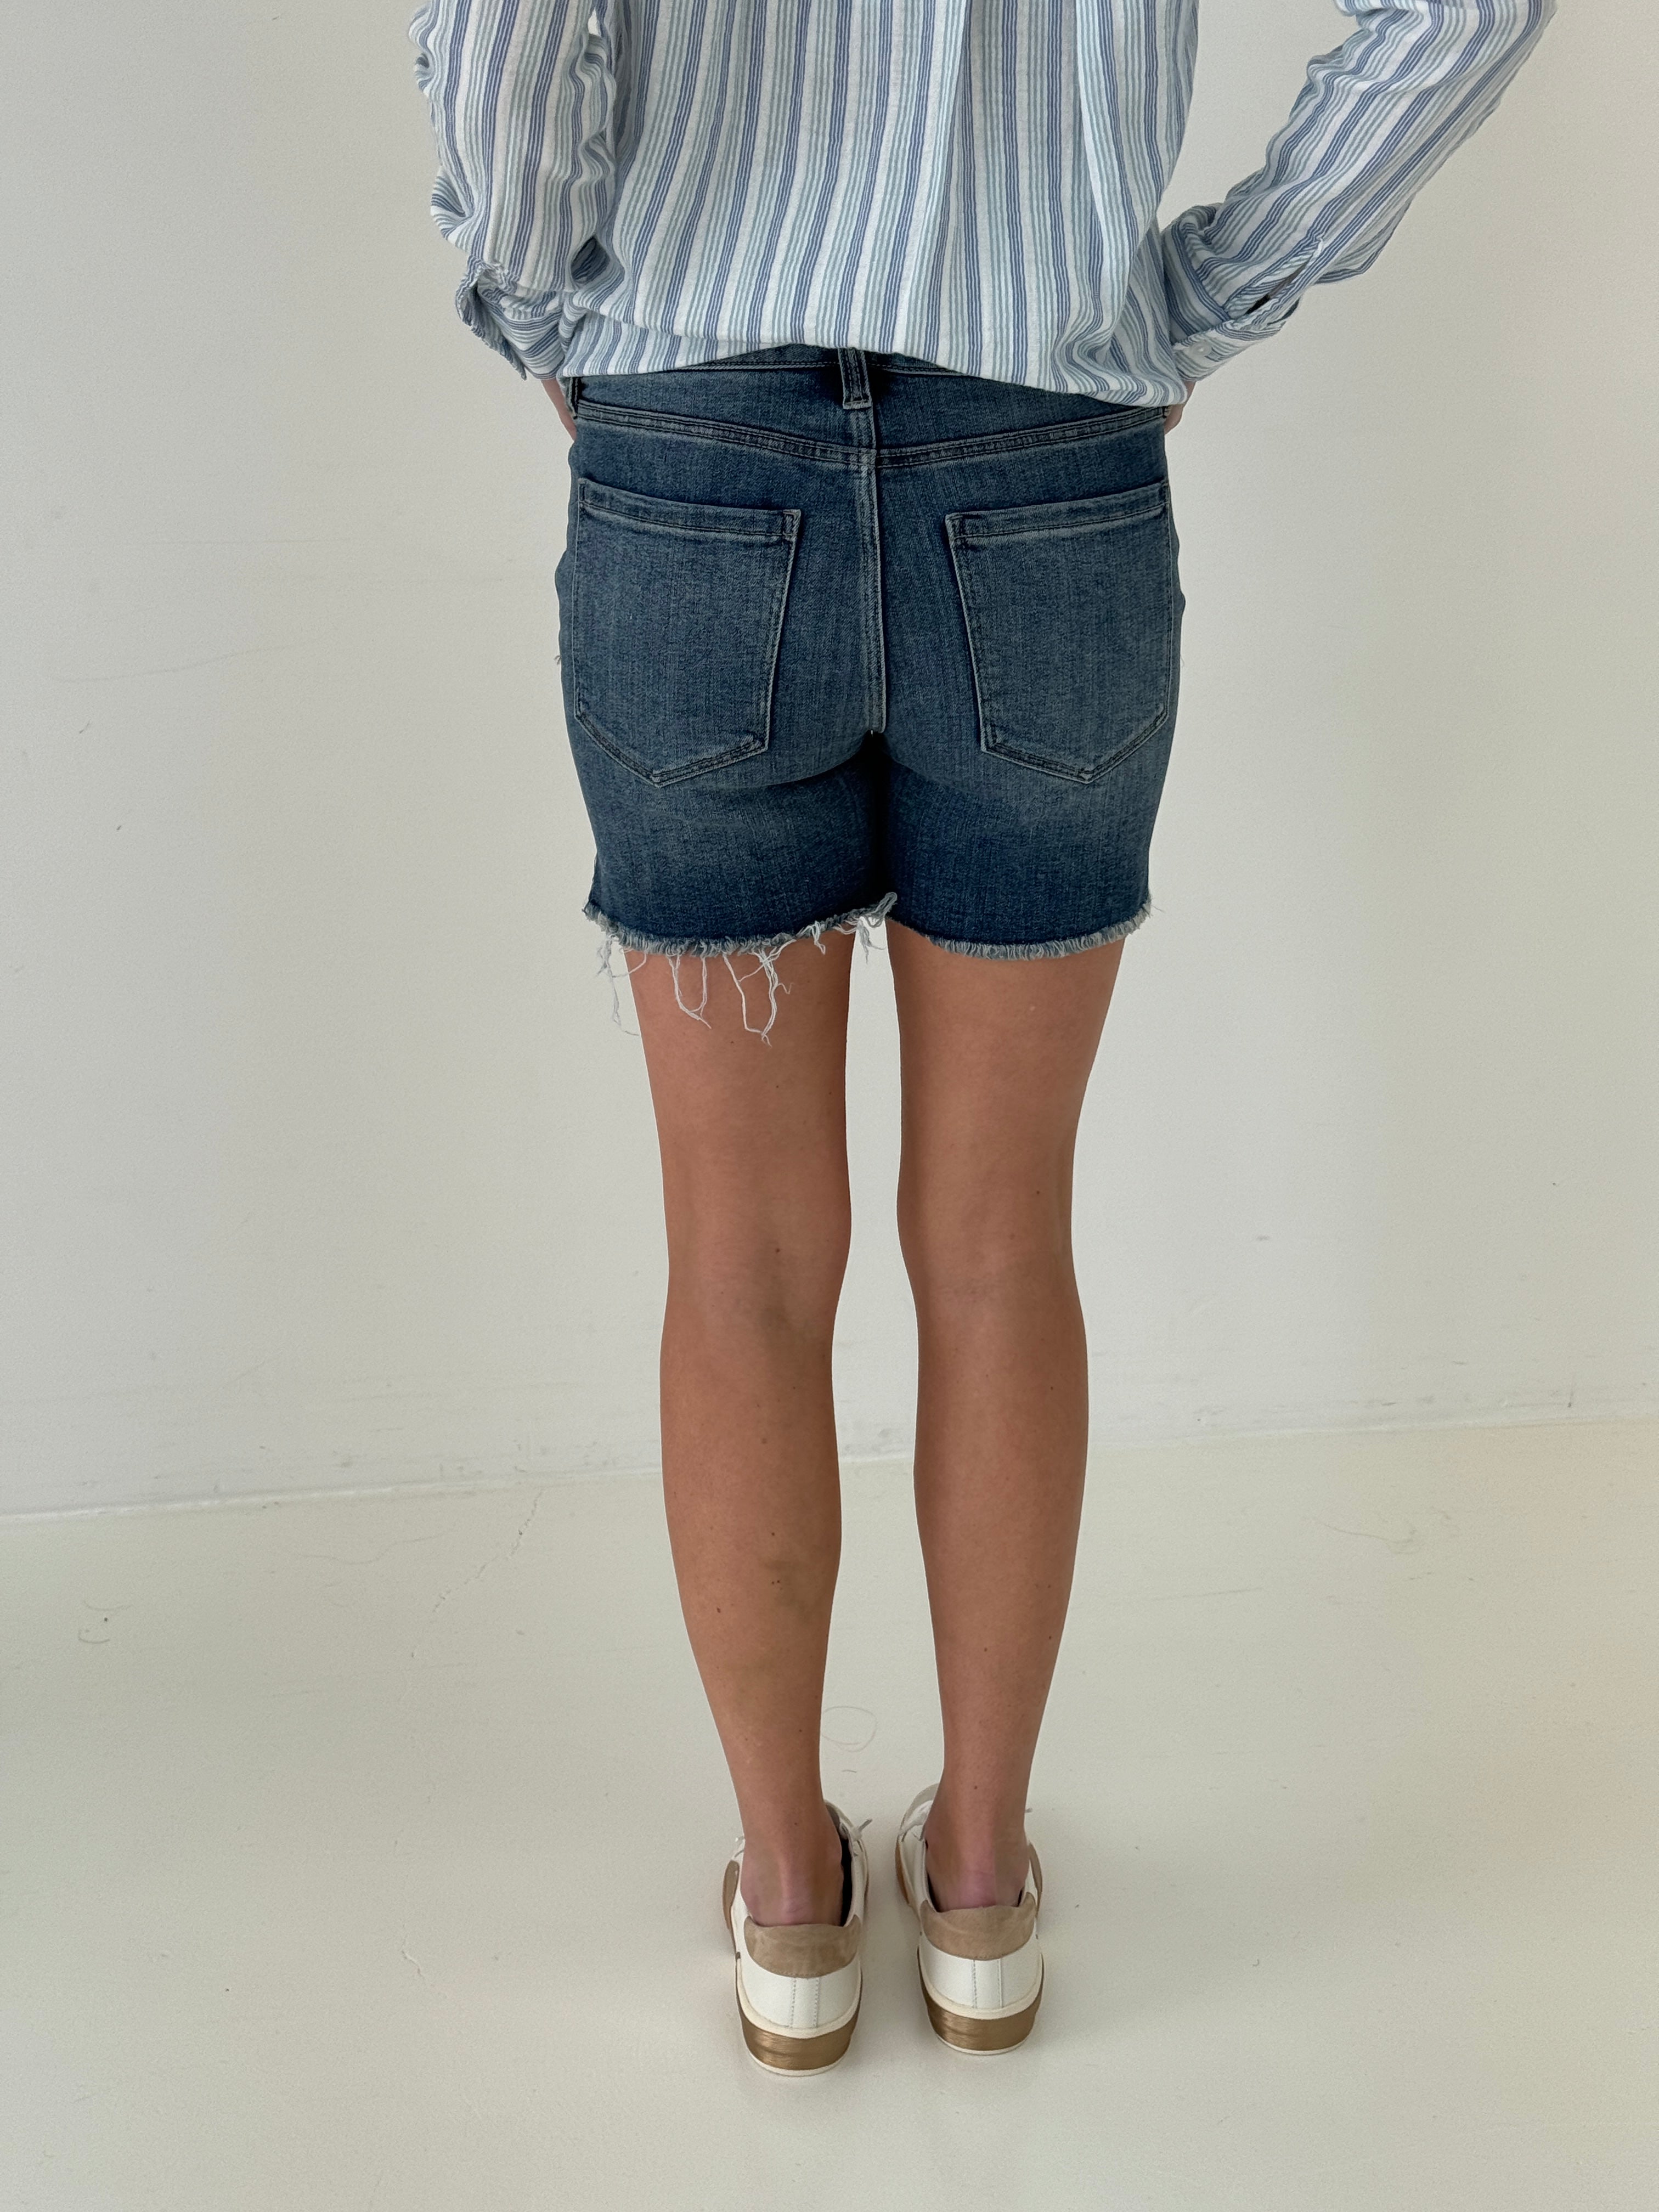 Liverpool Vickie Fray Hem Short in Harpswell Wash-232 Shorts-Little Bird Boutique